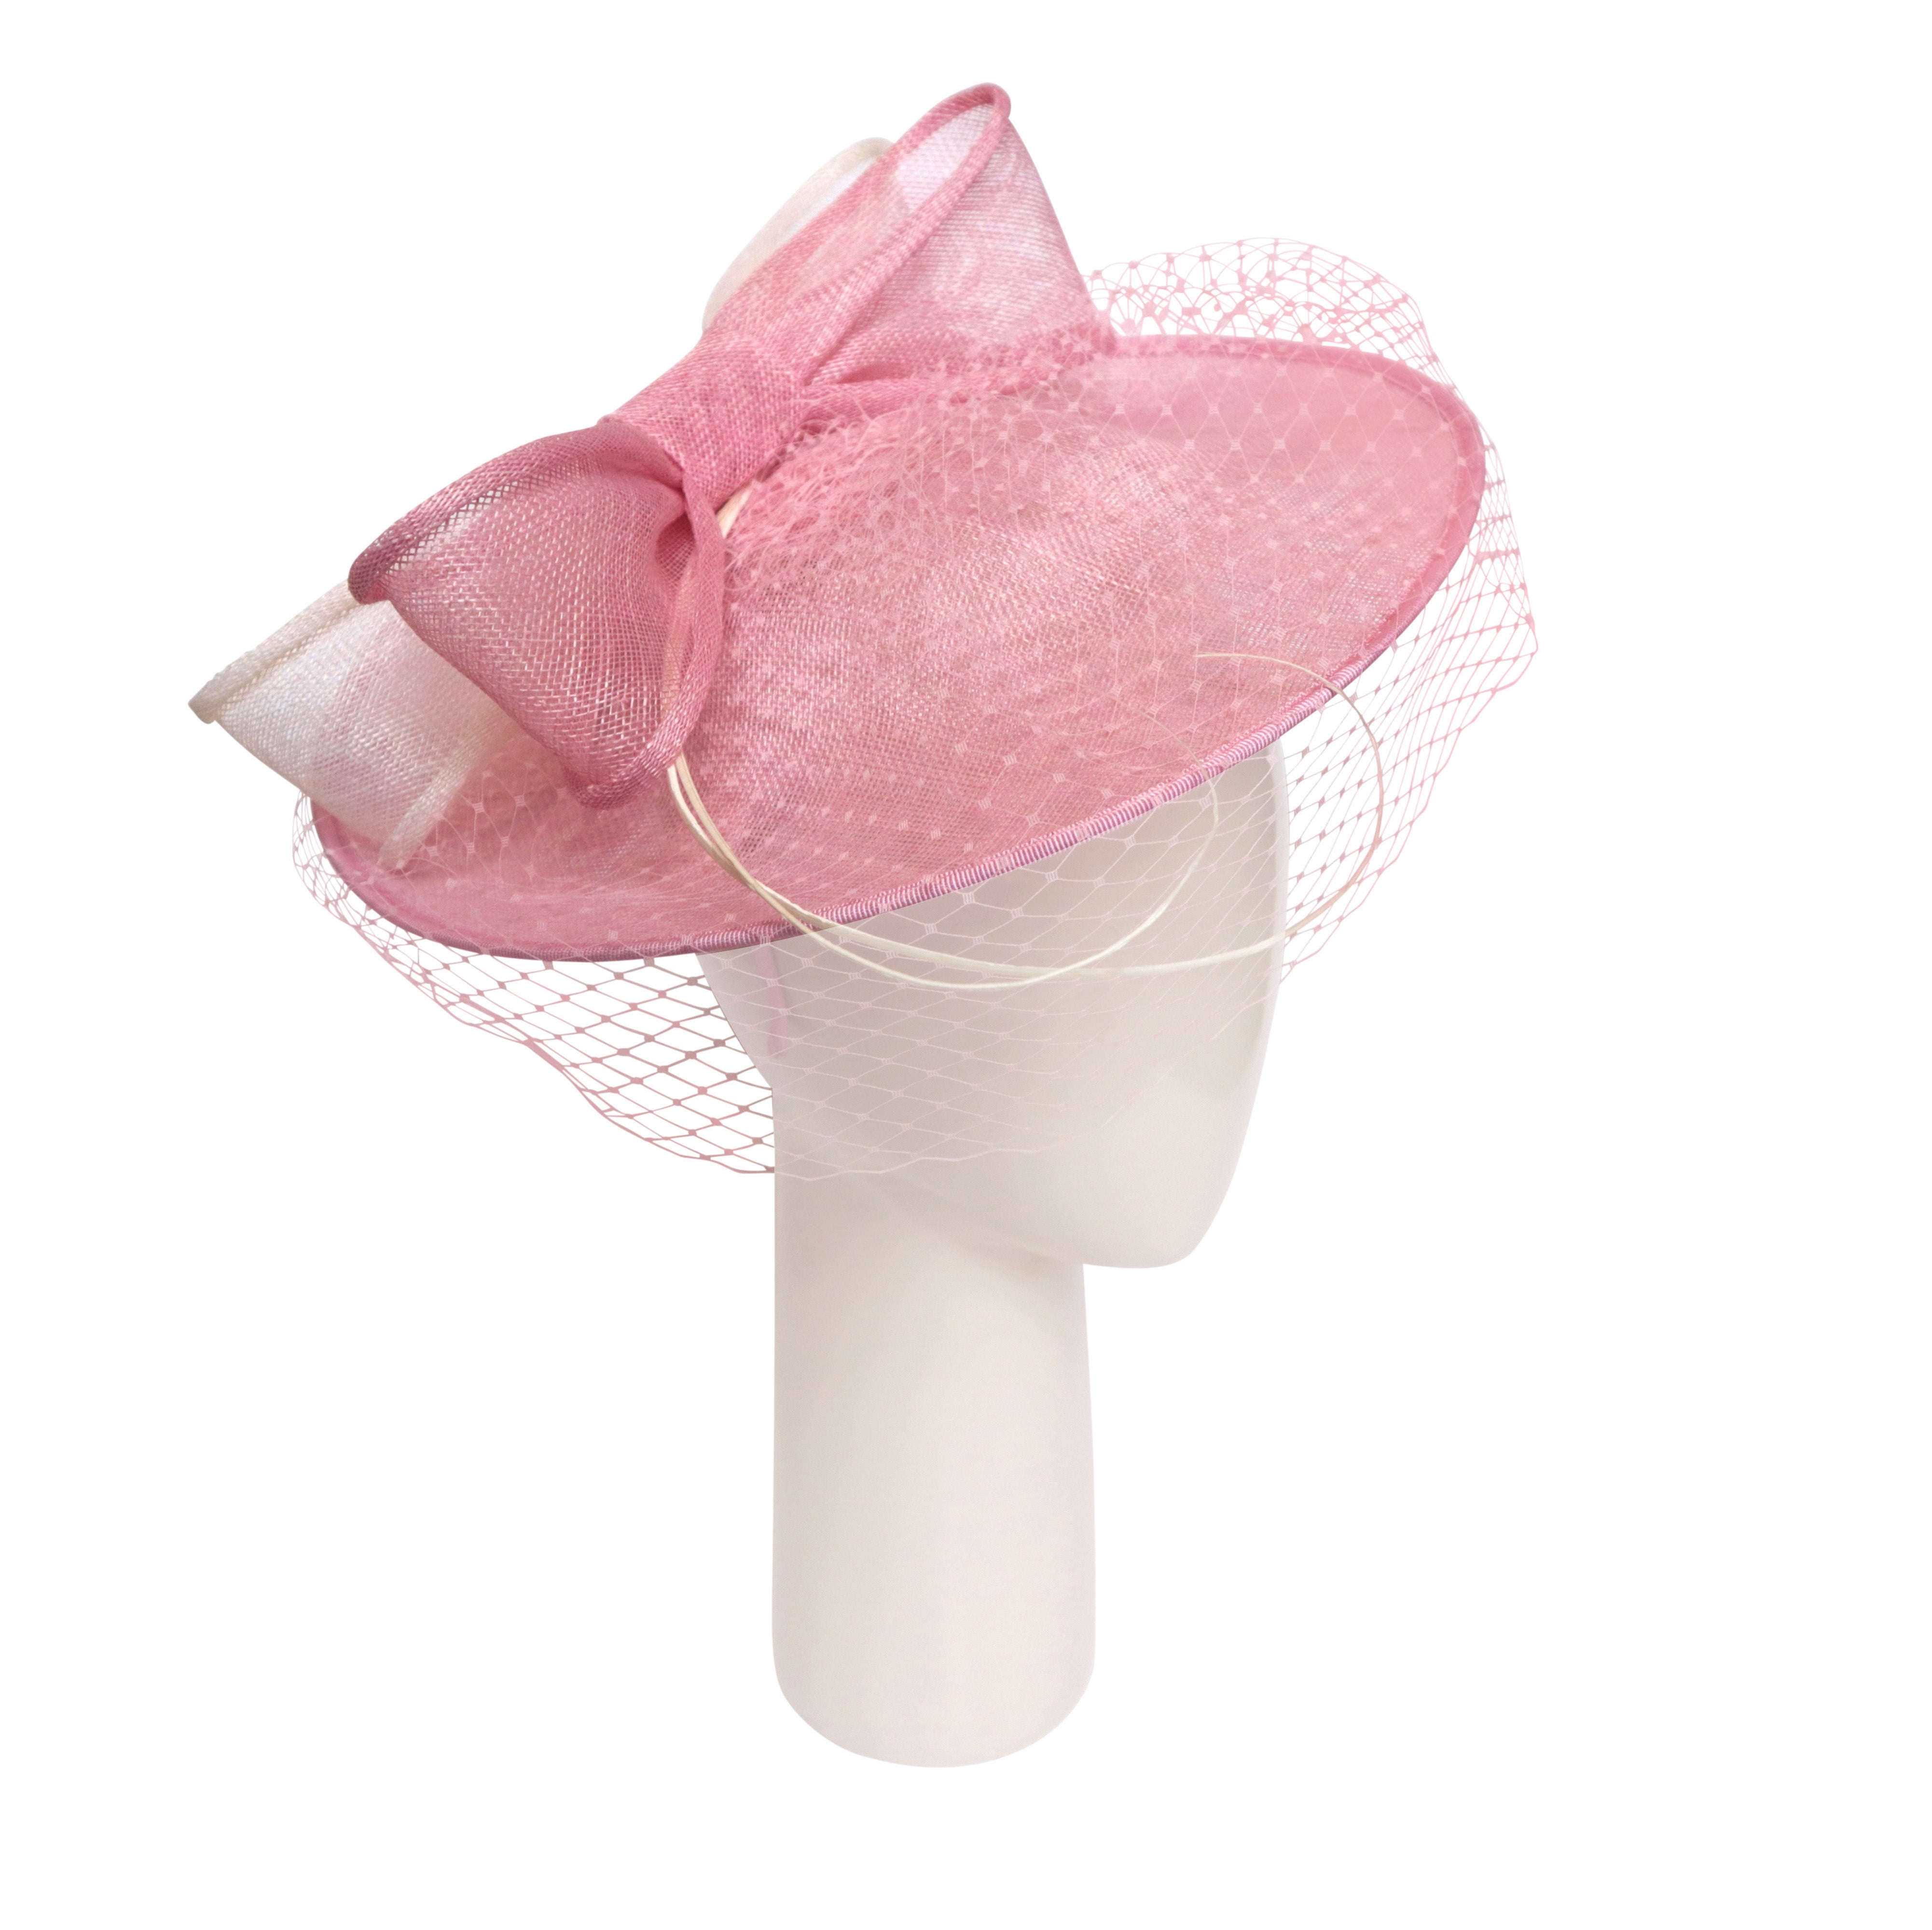 Small Disc Hat with Veil in Pale Pink